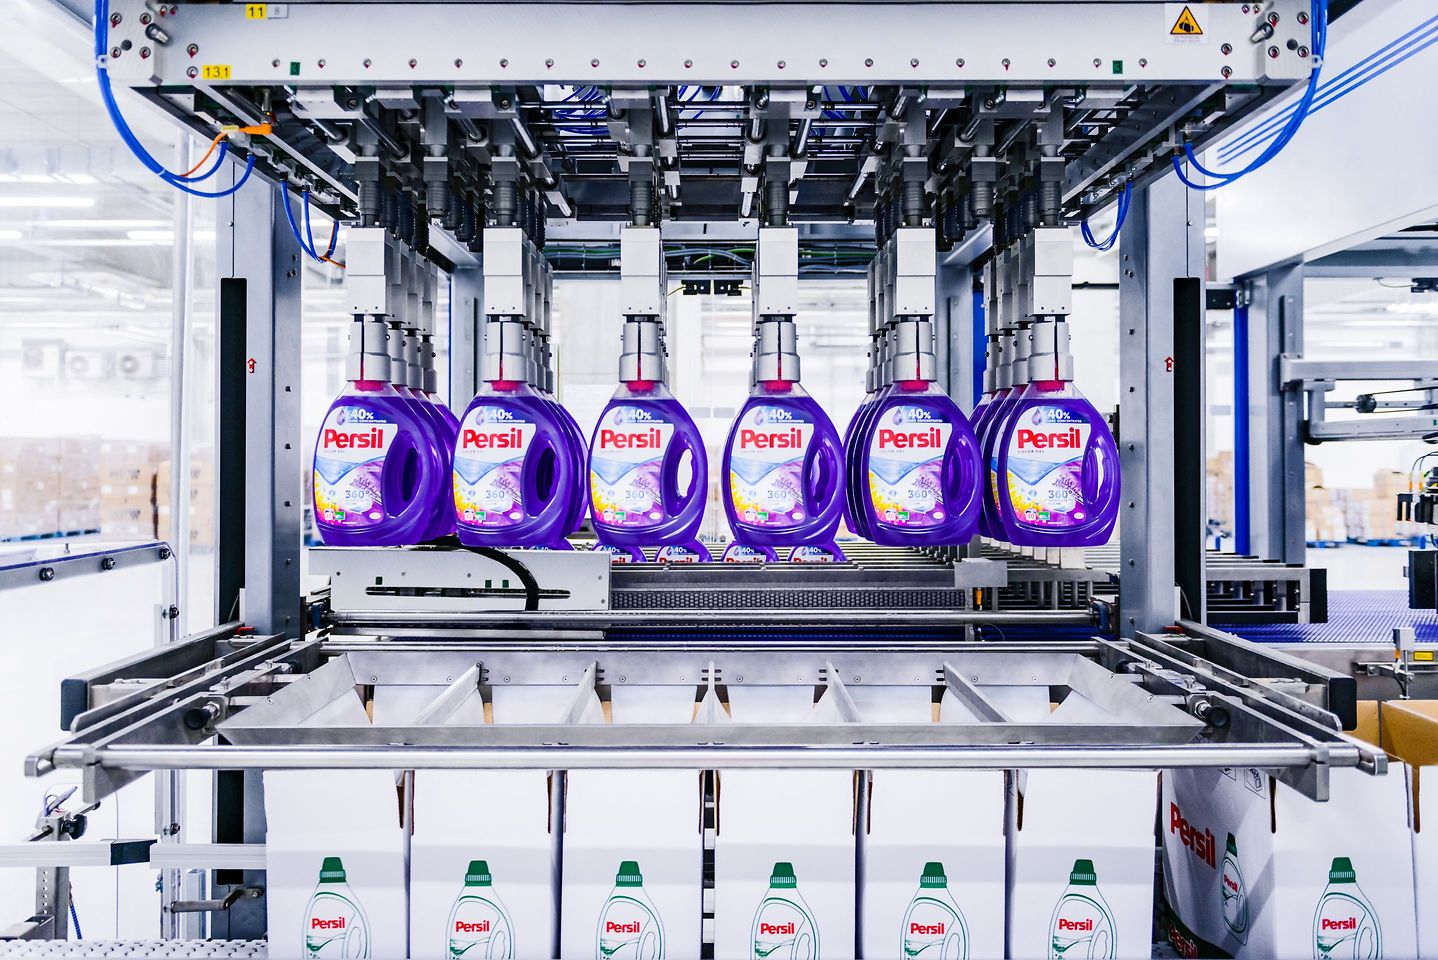 Henkel has developed a cloud-based data platform that connects more than 30 sites and more than 10 distribution centers in real time.